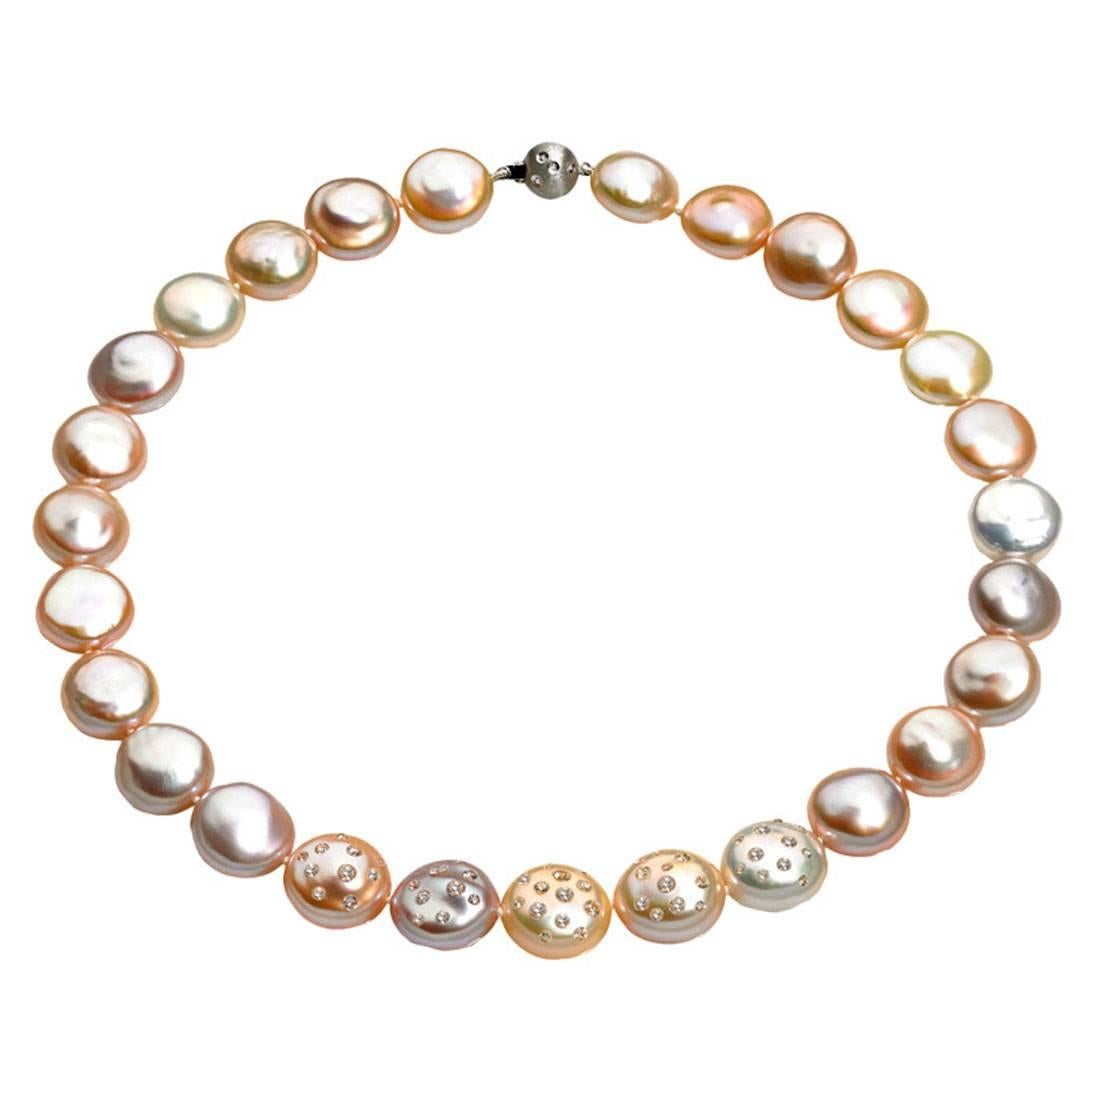 One-of-a-Kind Graduated Coin Pearl Necklace with a diamond-embedded 18k white gold ball clasp and five diamond-embedded pearls (total diamond weight = 2.48cts) that can be worn endless ways as each pearl individually rotates to allow for showing 0,